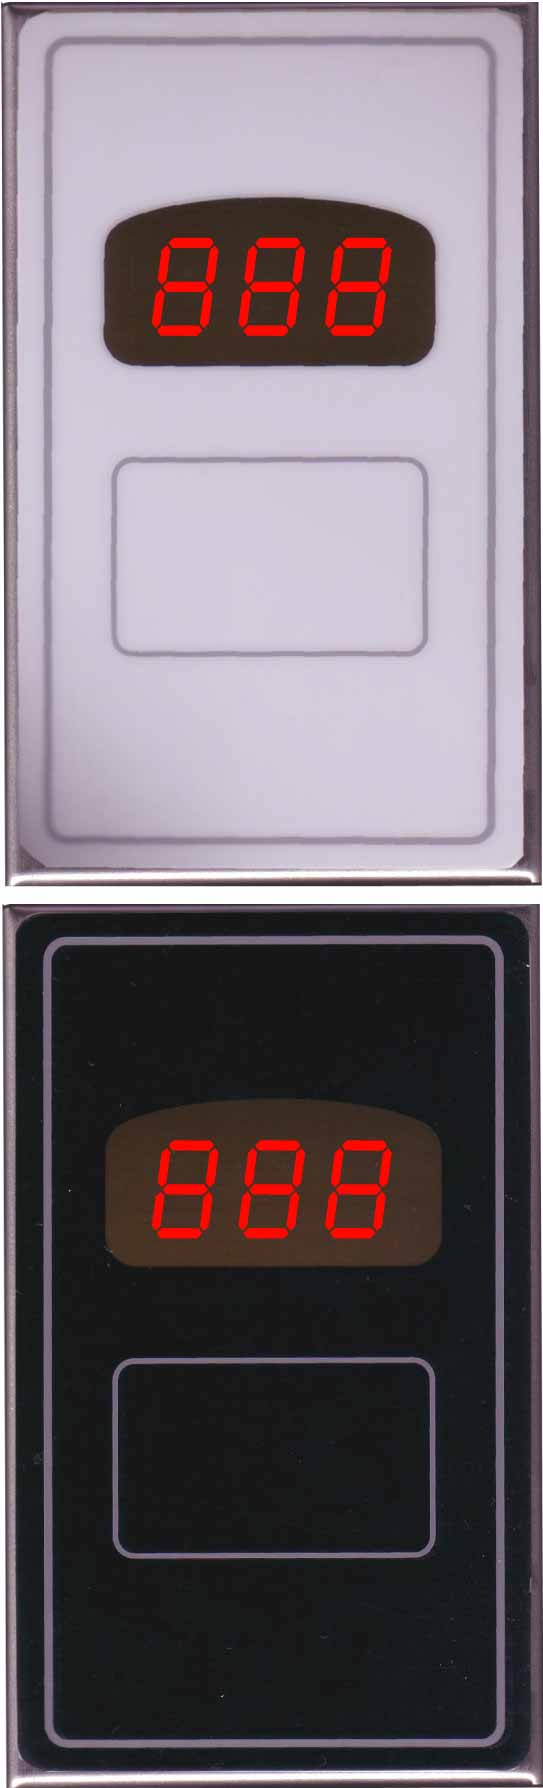 SDM-4 Digital Thermometer face plates